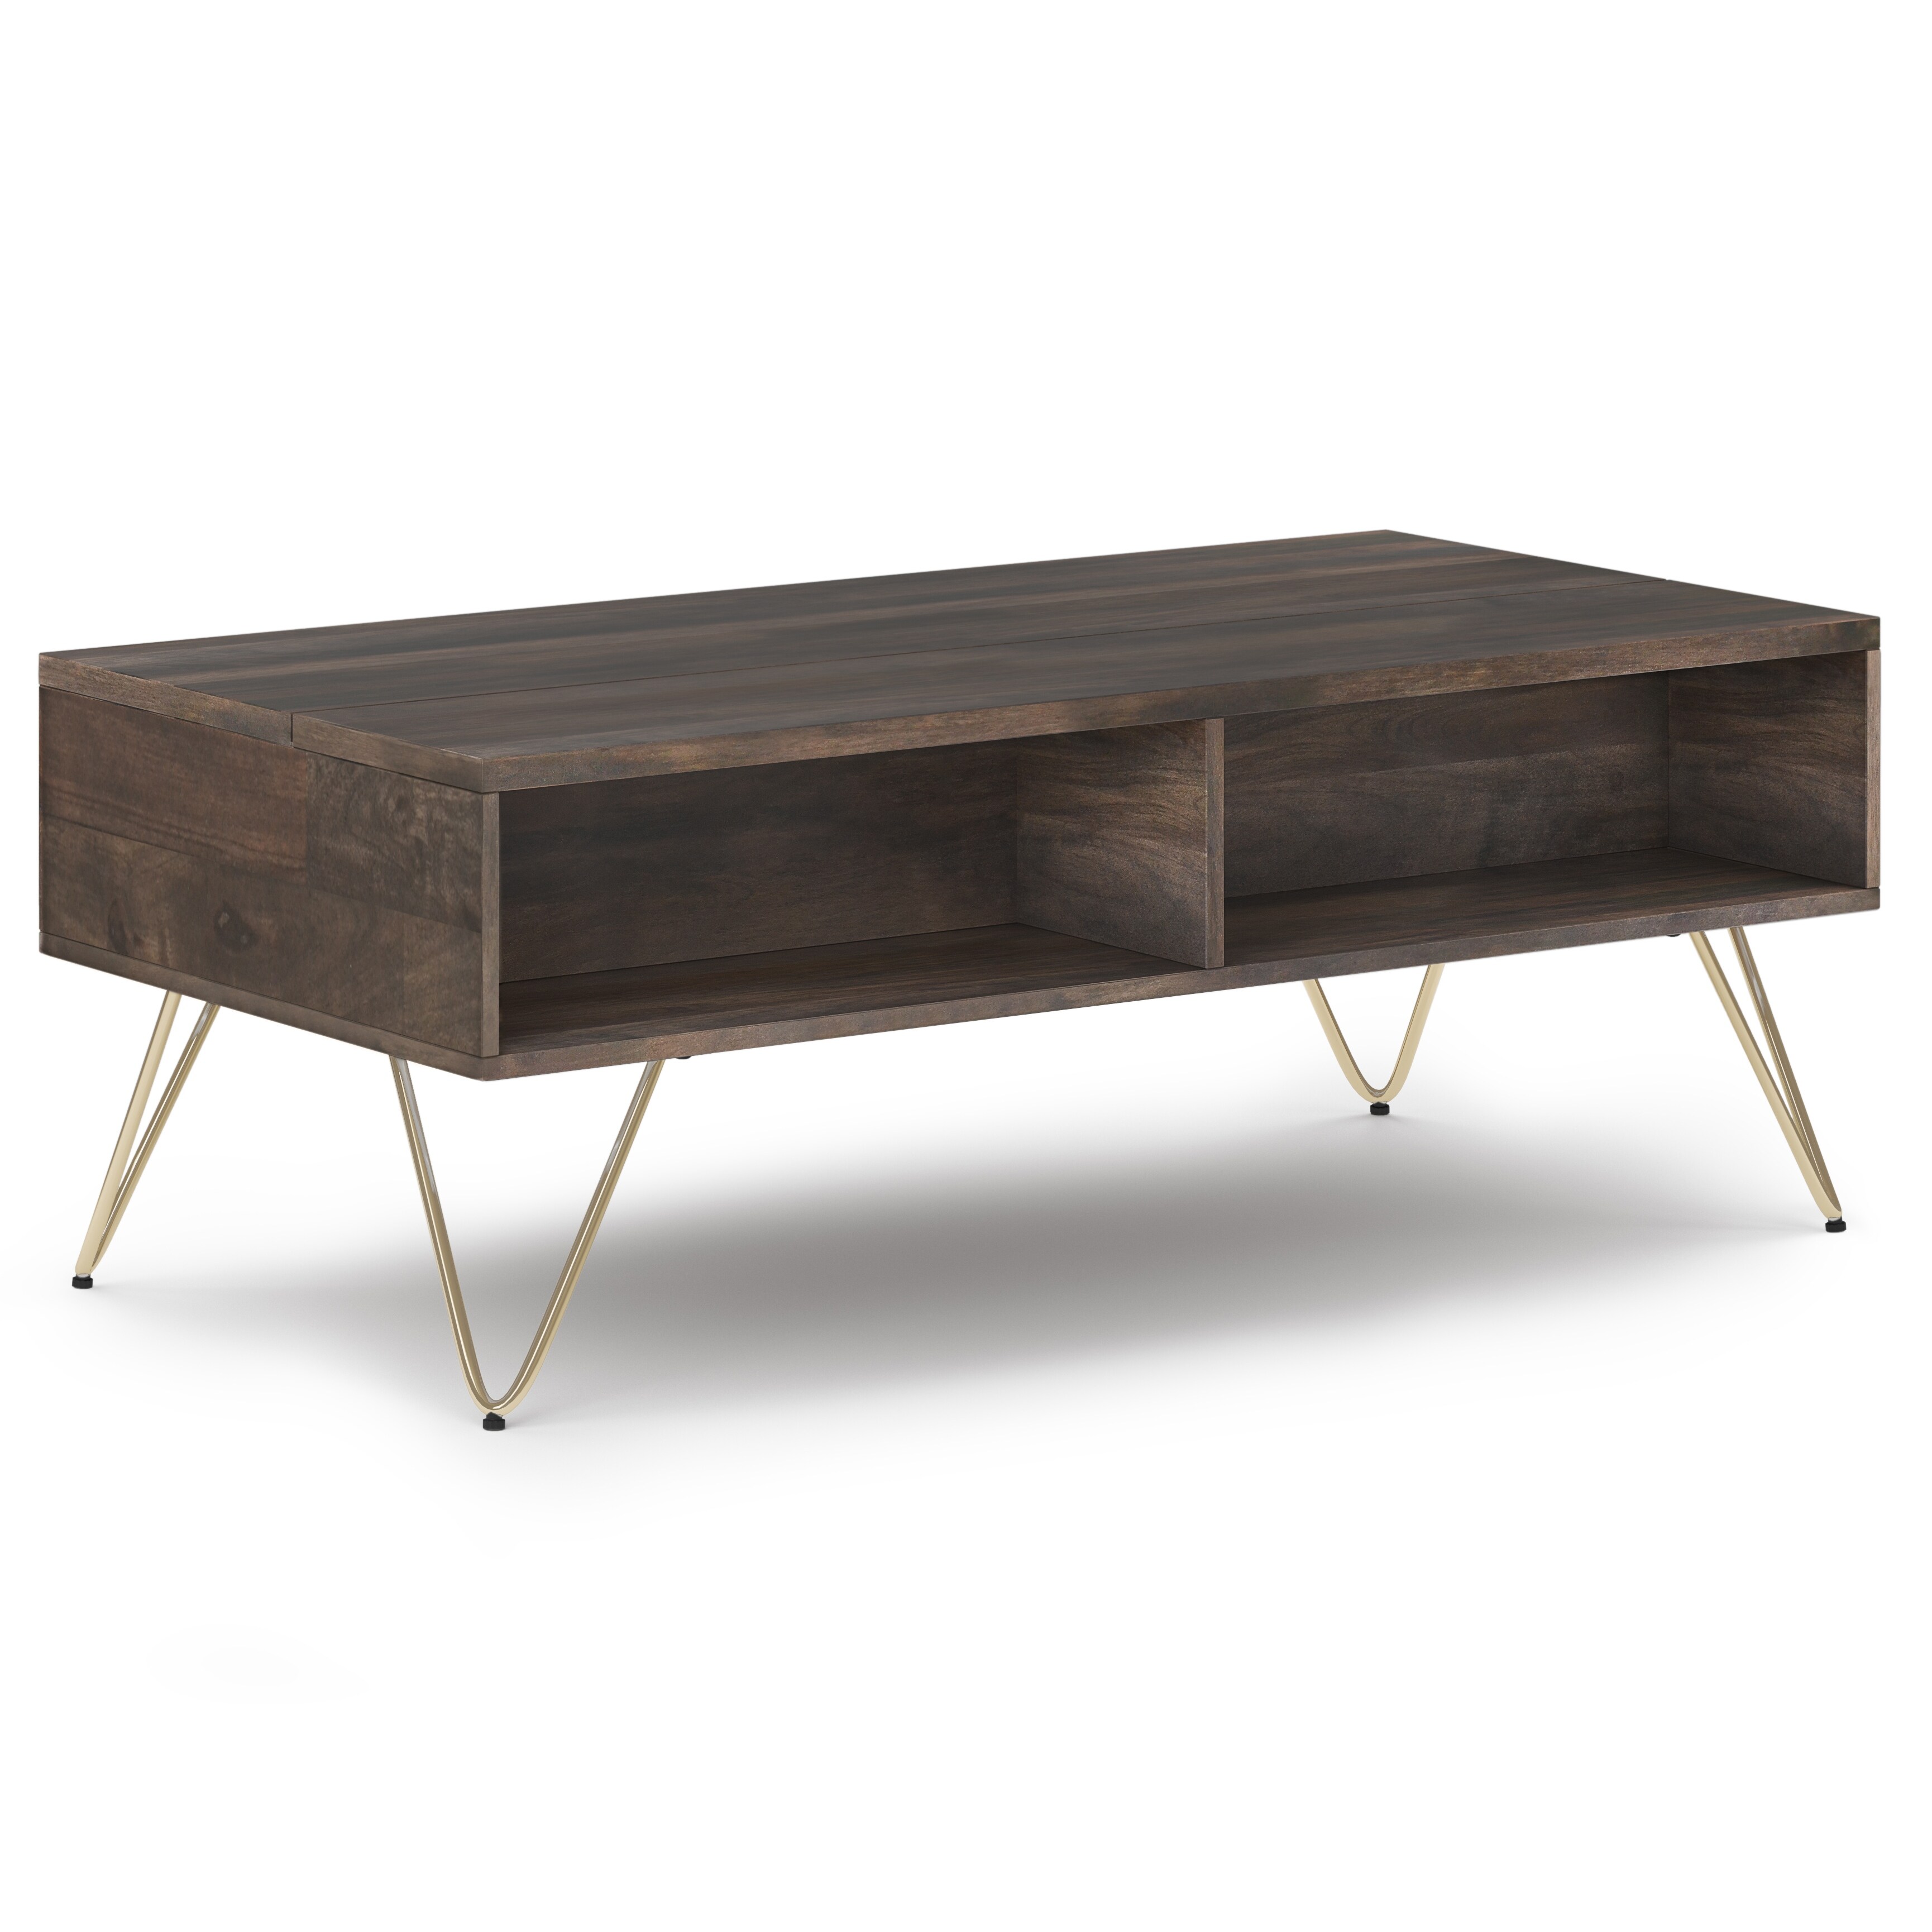 WyndenHall Moreno Mango Wood Metal Rectangle Industrial Lift Top Coffee Table Ebony 48 W x 24 D x 22 H - image 1 of 5